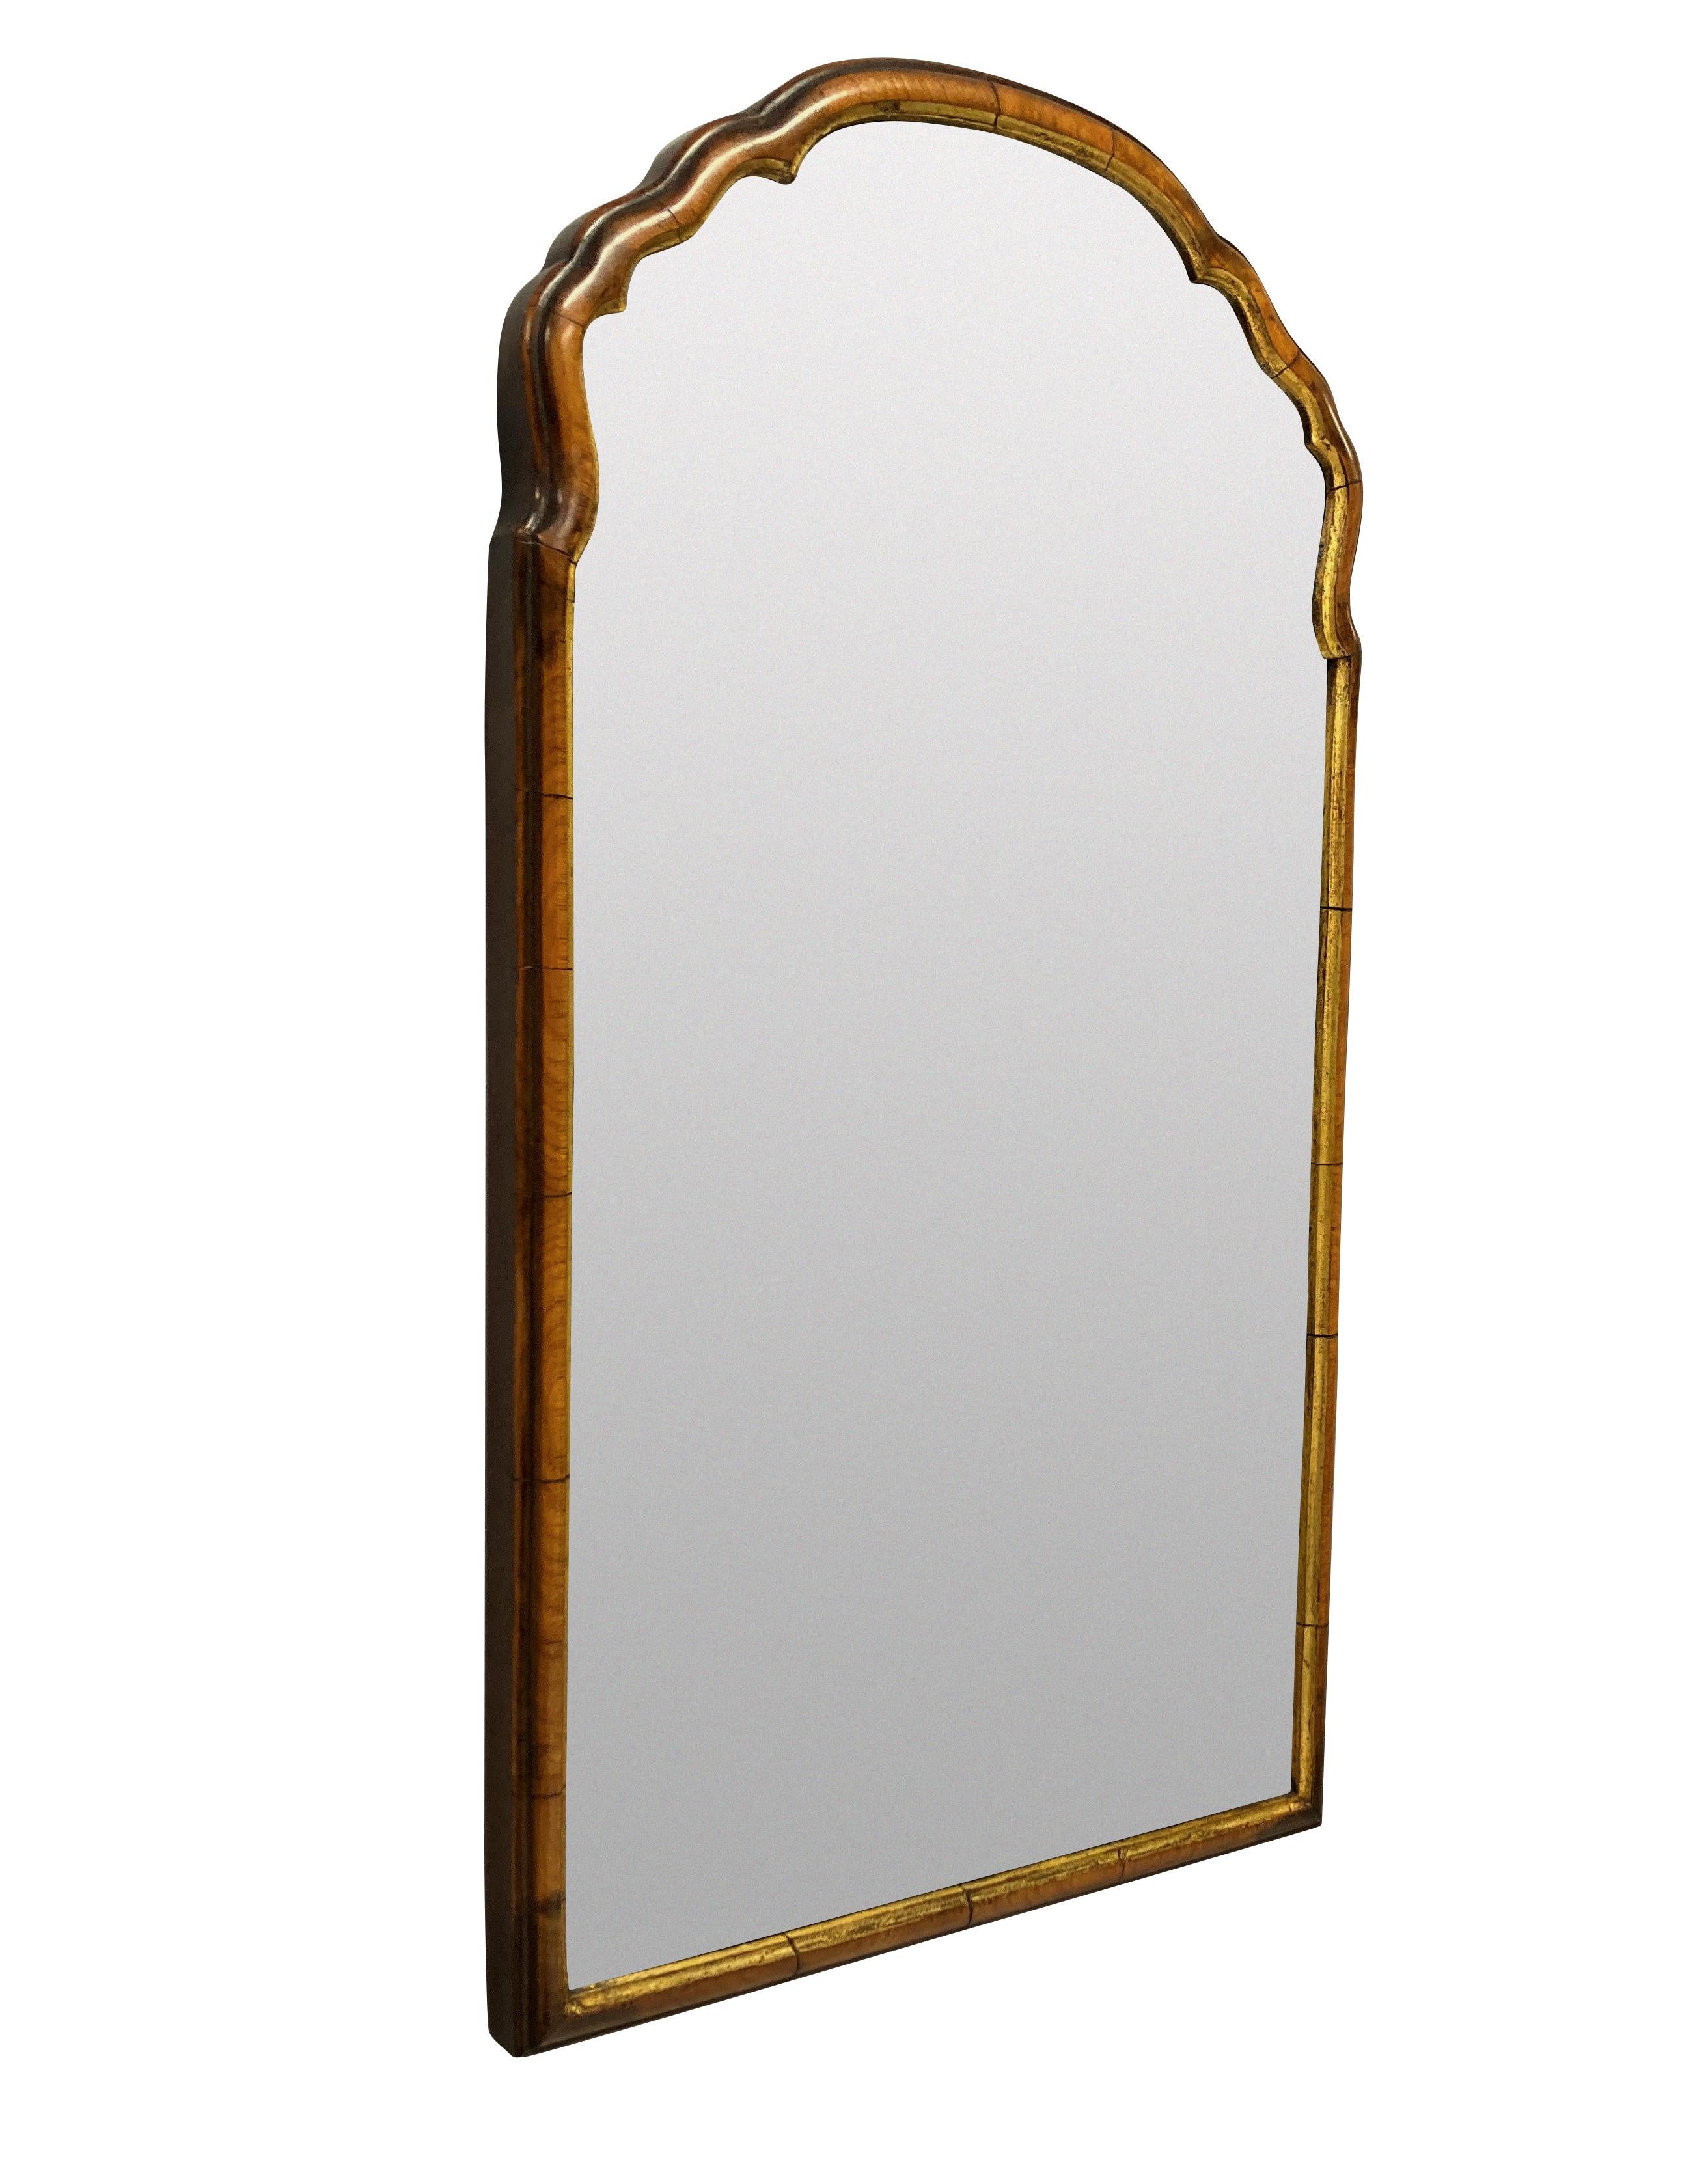 A charming little Queen Anne style mirror in walnut, with a parcel gilt slip.